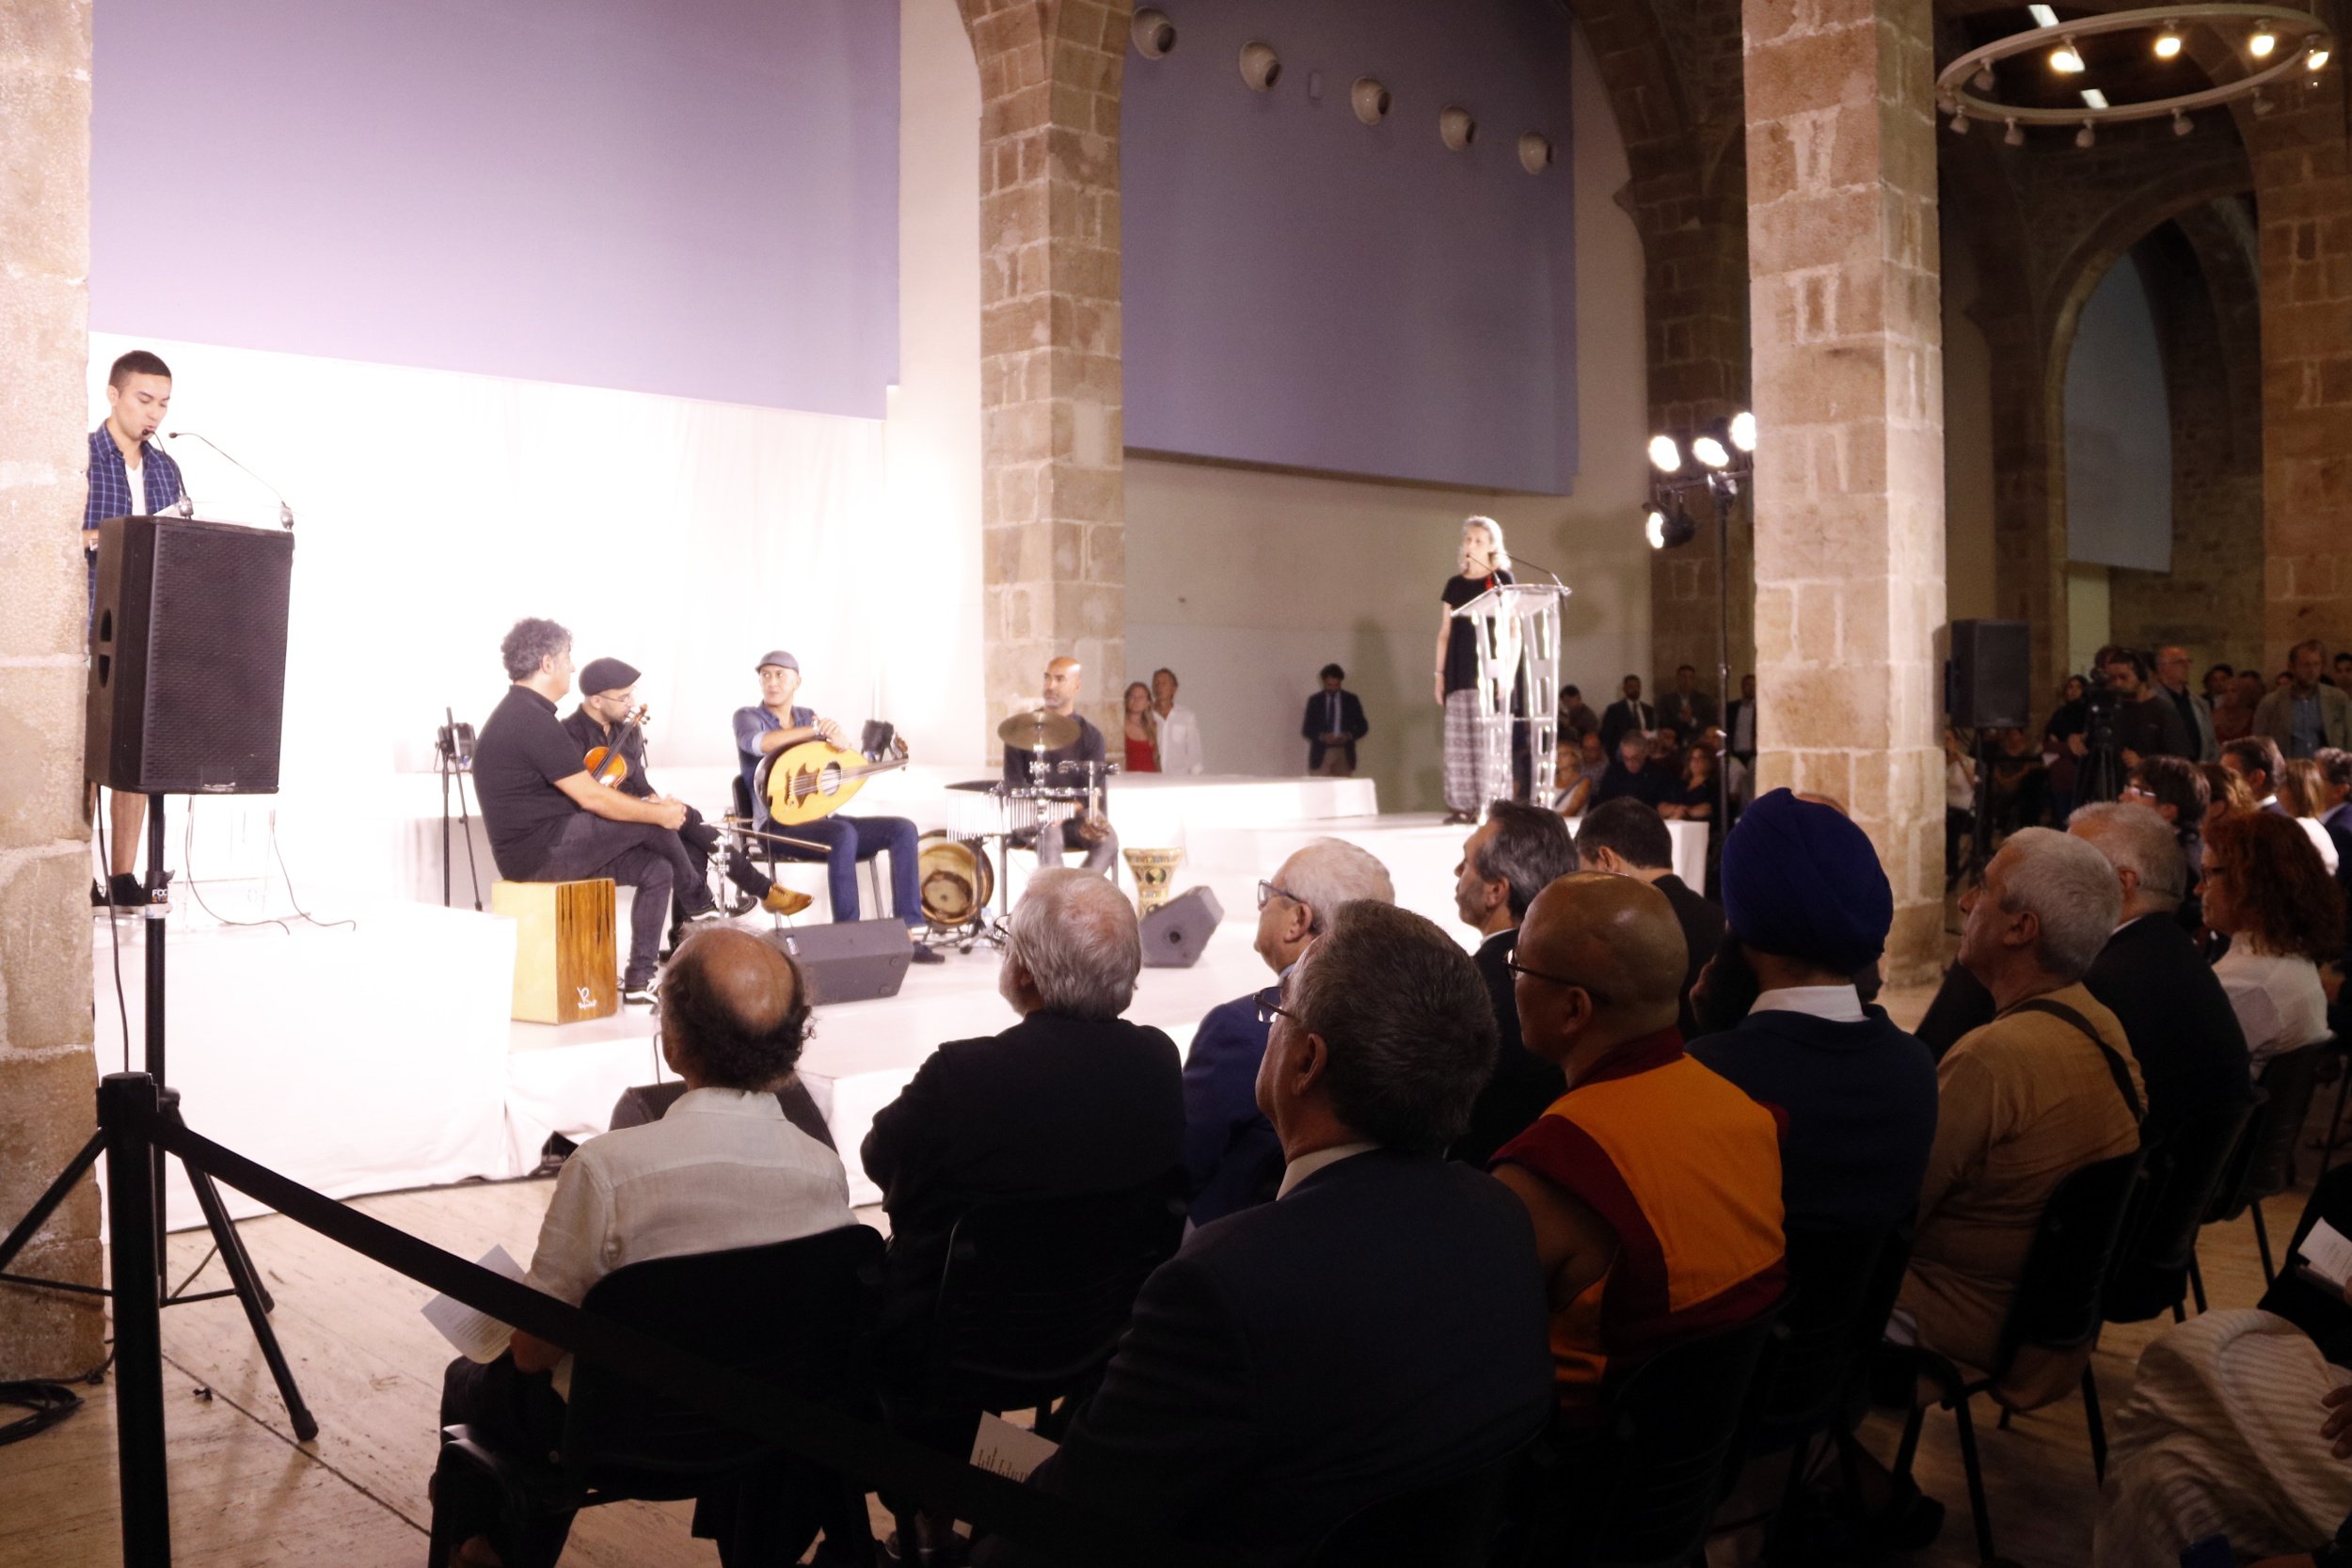 Barcelona holds interfaith event as "reflection of the diversity" of the city